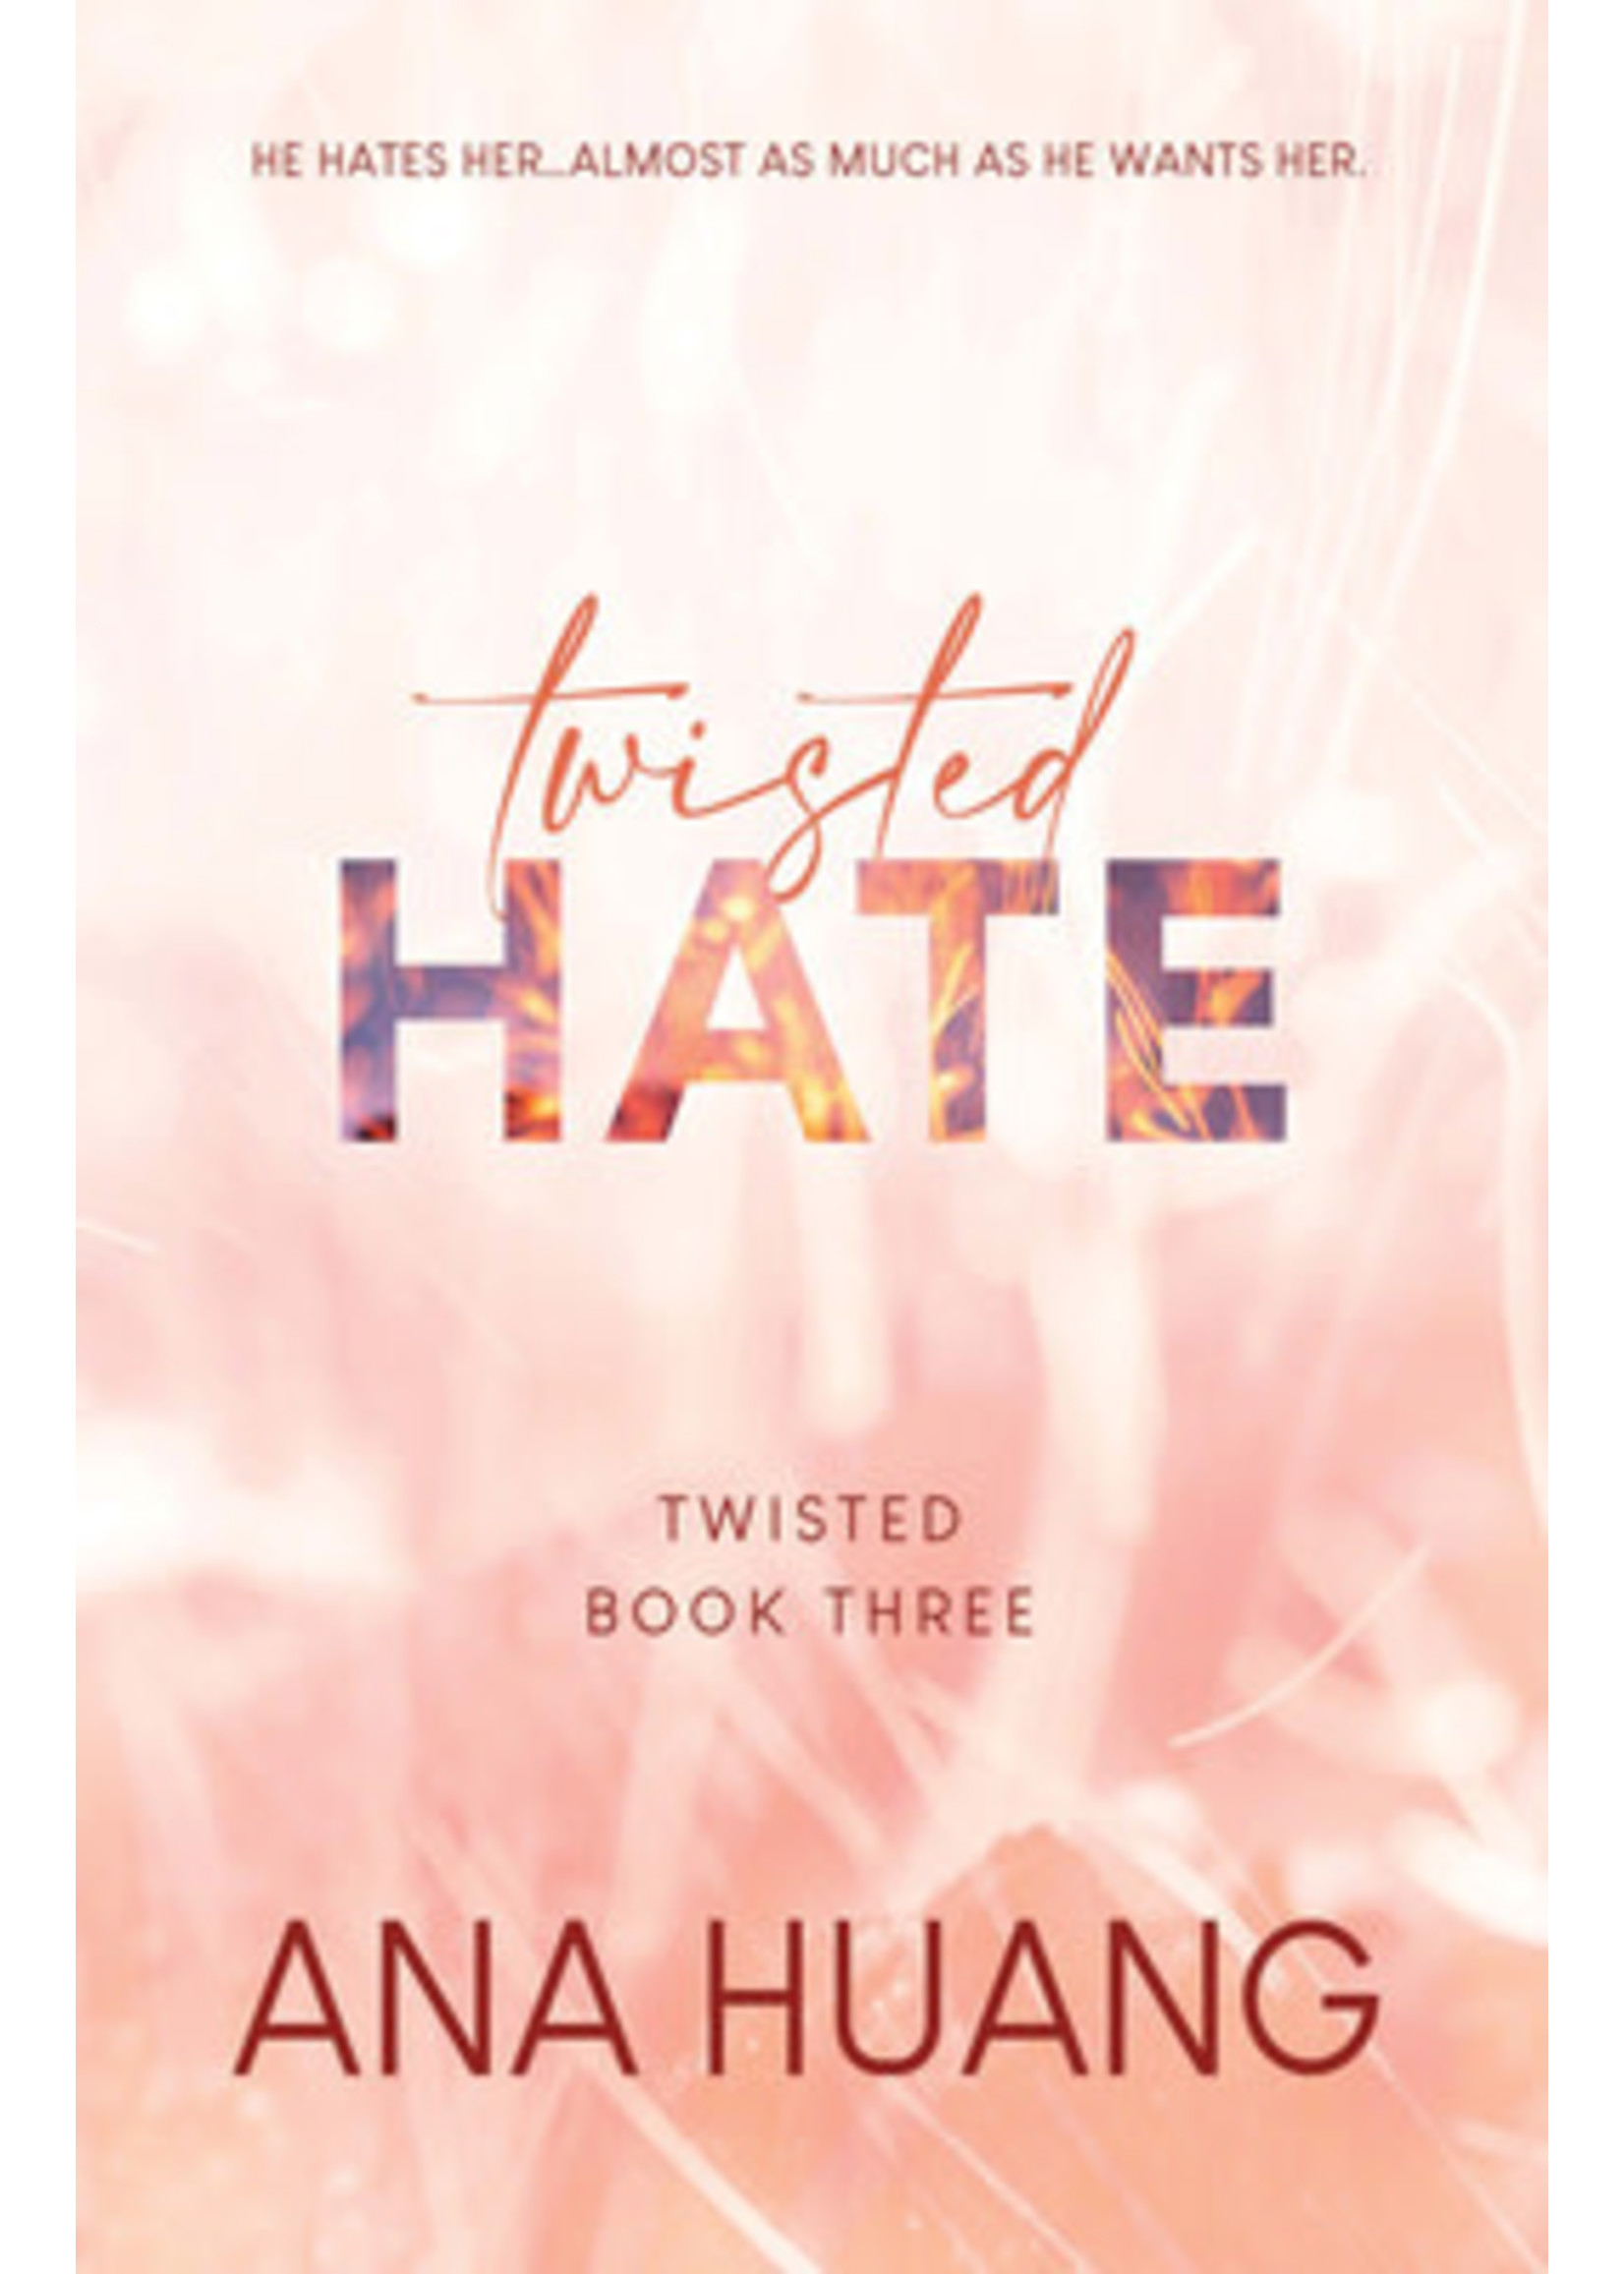 Twisted Hate (Twisted #3) by Ana Huang